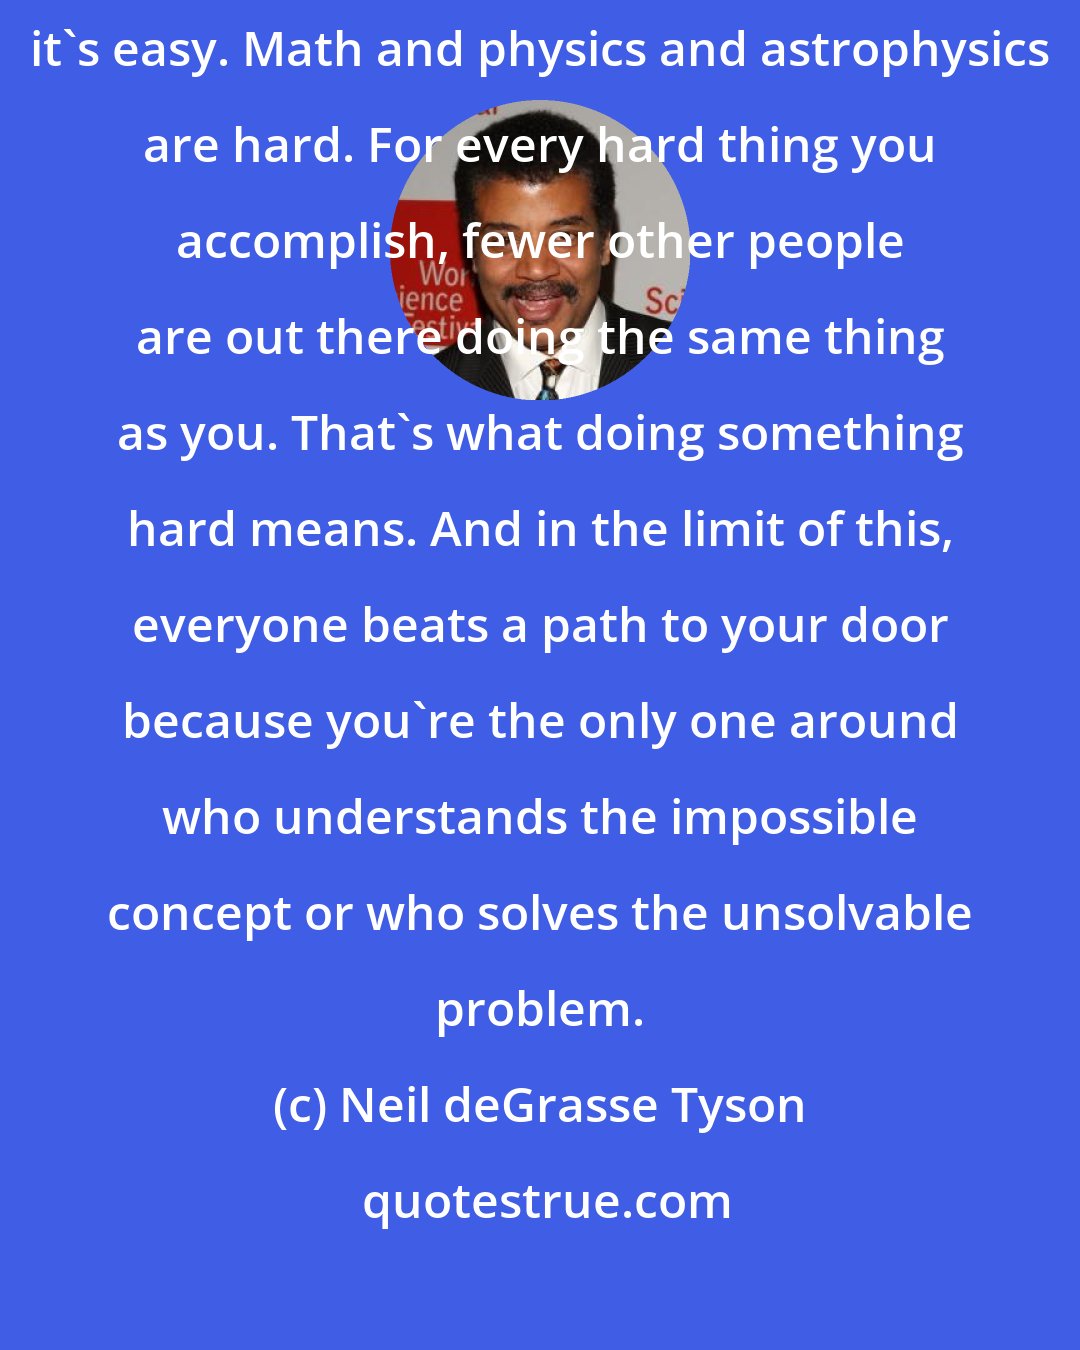 Neil deGrasse Tyson: In whatever you choose to do, do it because it's hard, not because it's easy. Math and physics and astrophysics are hard. For every hard thing you accomplish, fewer other people are out there doing the same thing as you. That's what doing something hard means. And in the limit of this, everyone beats a path to your door because you're the only one around who understands the impossible concept or who solves the unsolvable problem.